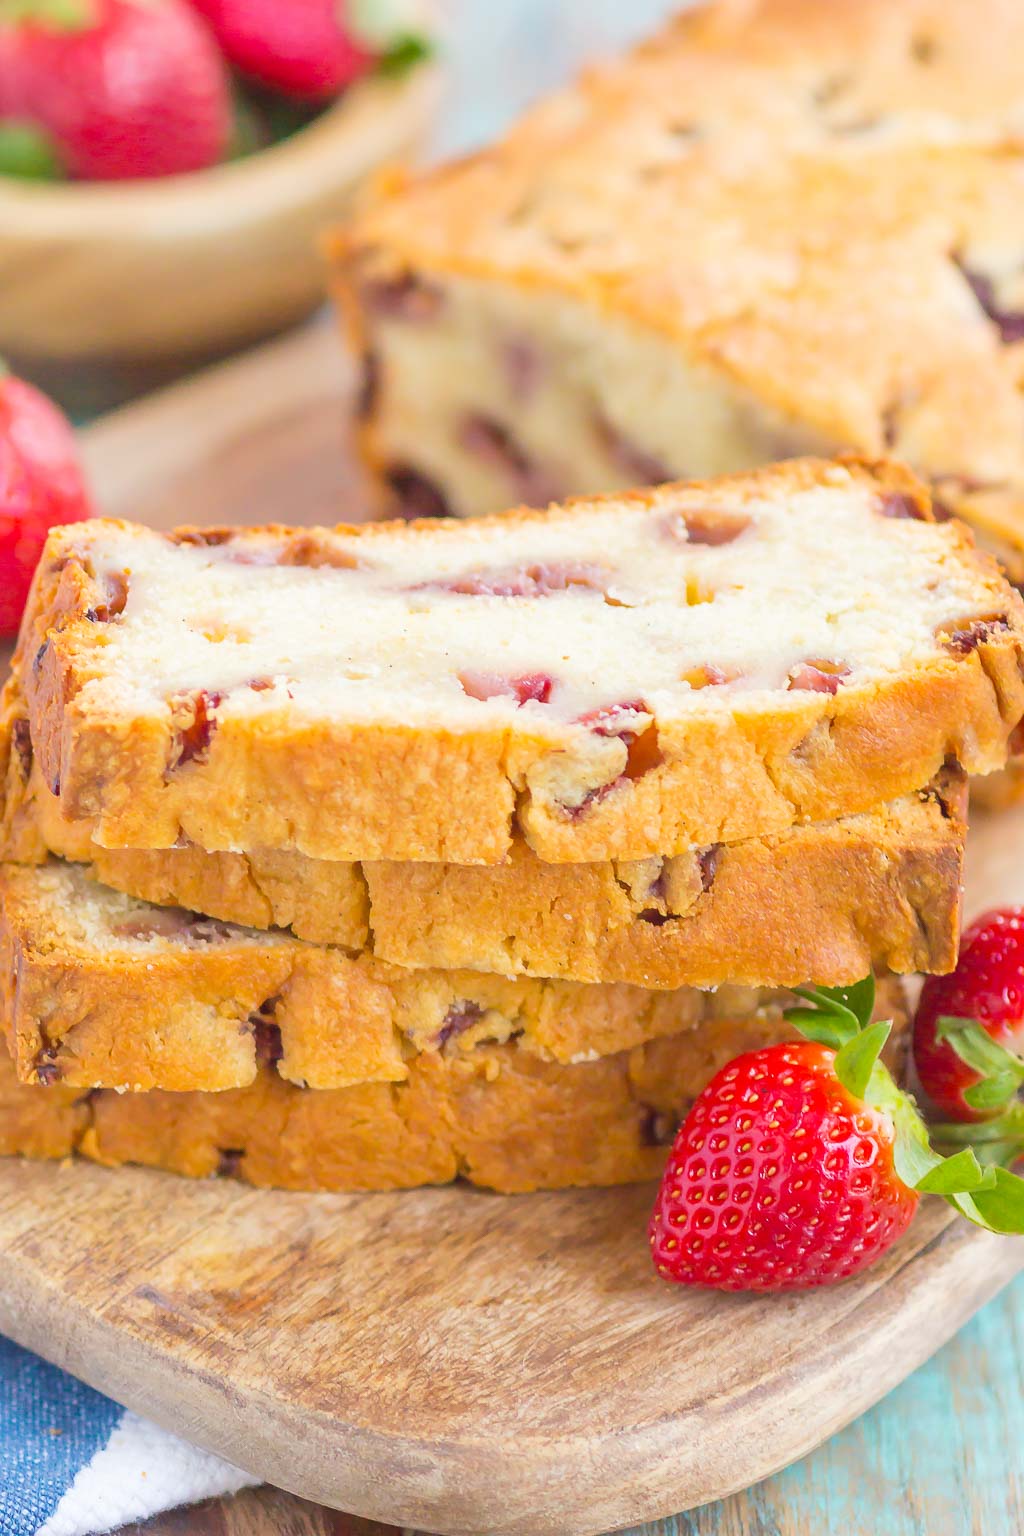 Strawberry Pound Cake is a simple, one bowl recipe that's bursting with flavor. Fresh strawberries are sprinkled throughout this soft and dense pound cake, resulting in the most delicious taste. Perfect to serve alongside your morning coffee or as a tasty dessert! #poundcake #strawberrypoundcake